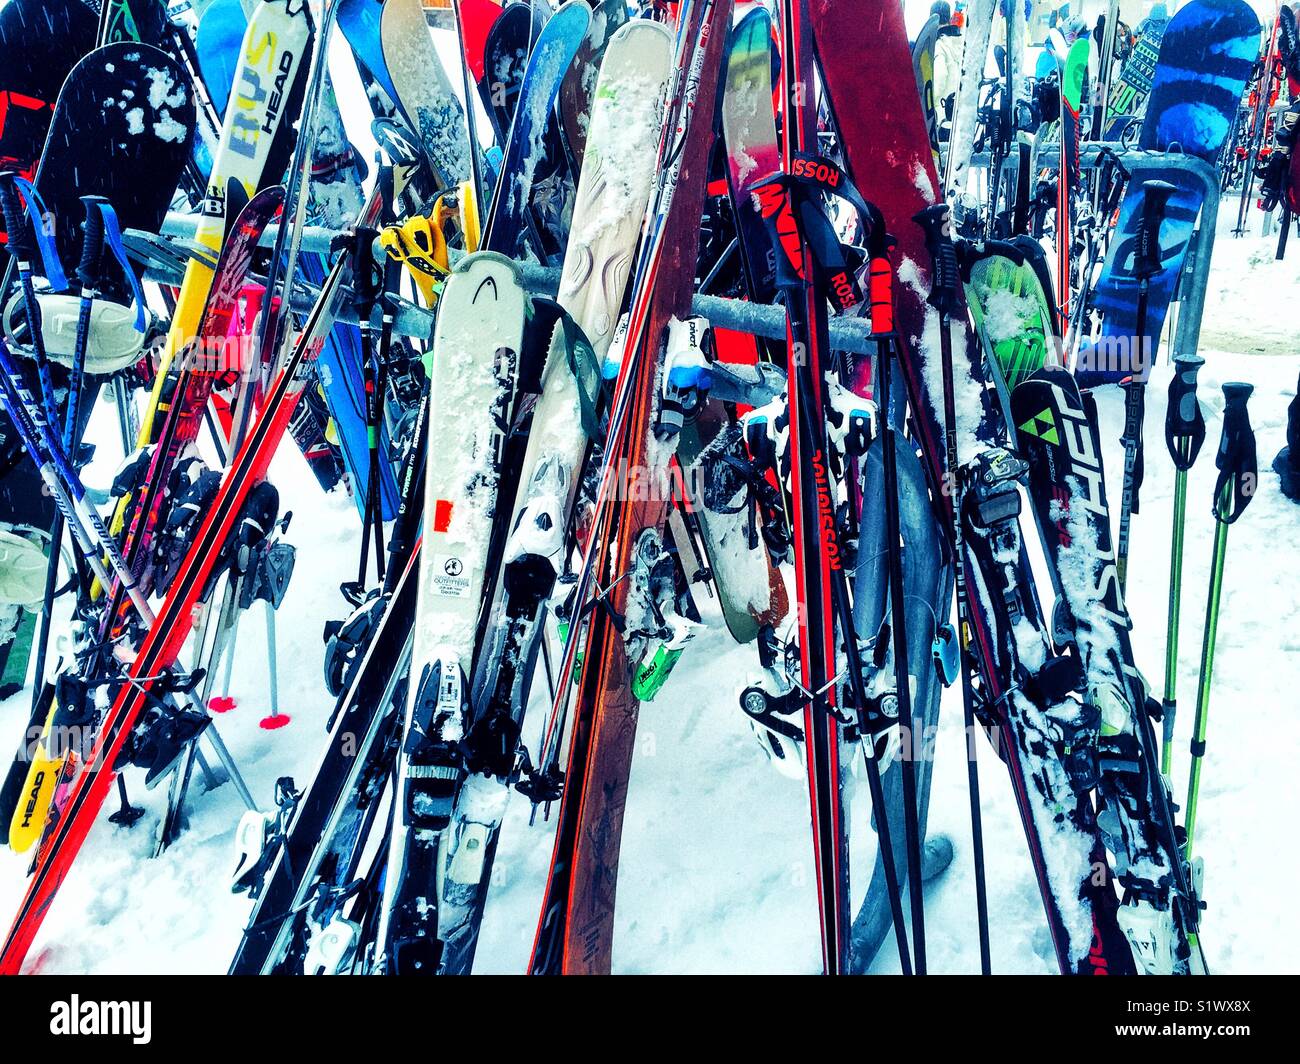 Downhill skis piled up Stock Photo